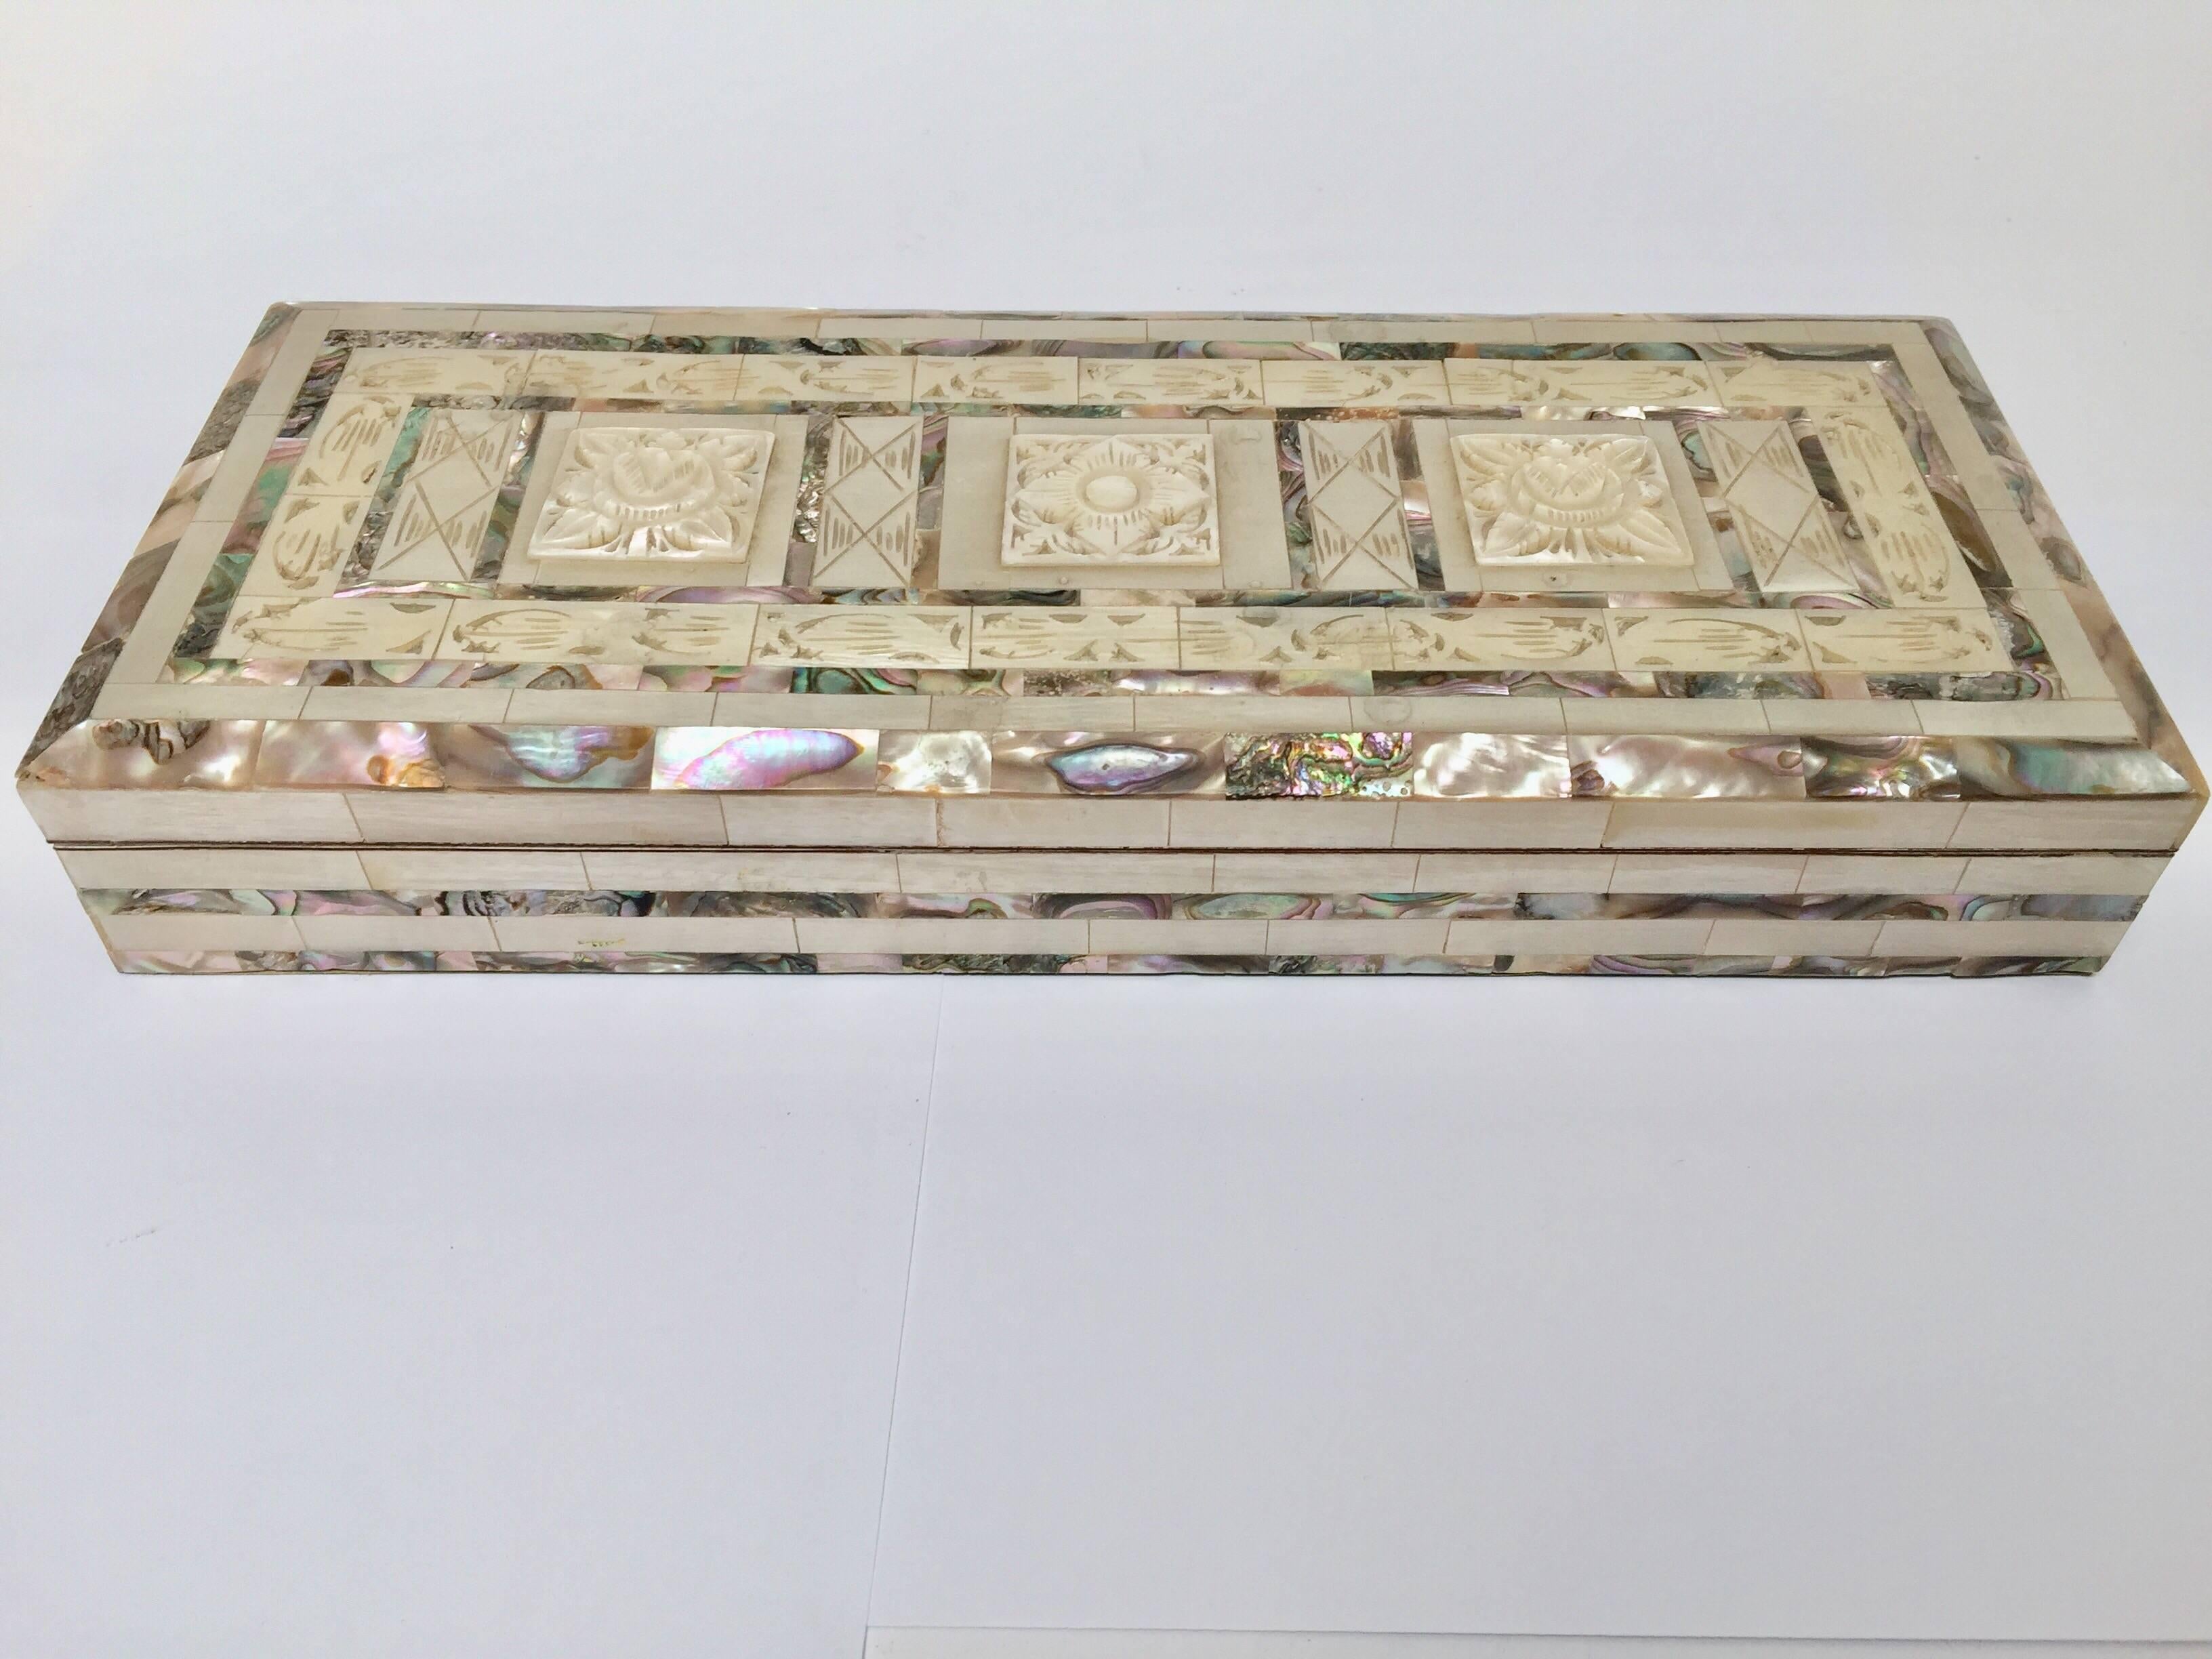 Middle Easter beautiful decorative rectangular box covered in abalone and hand-carved mother-of-pearl inlaid. 
Measures: Height 2 inches, length 12 inches x 5 inches wide. 
The box is lined in green velvet.
Islamic Folk Art, museum quality collector